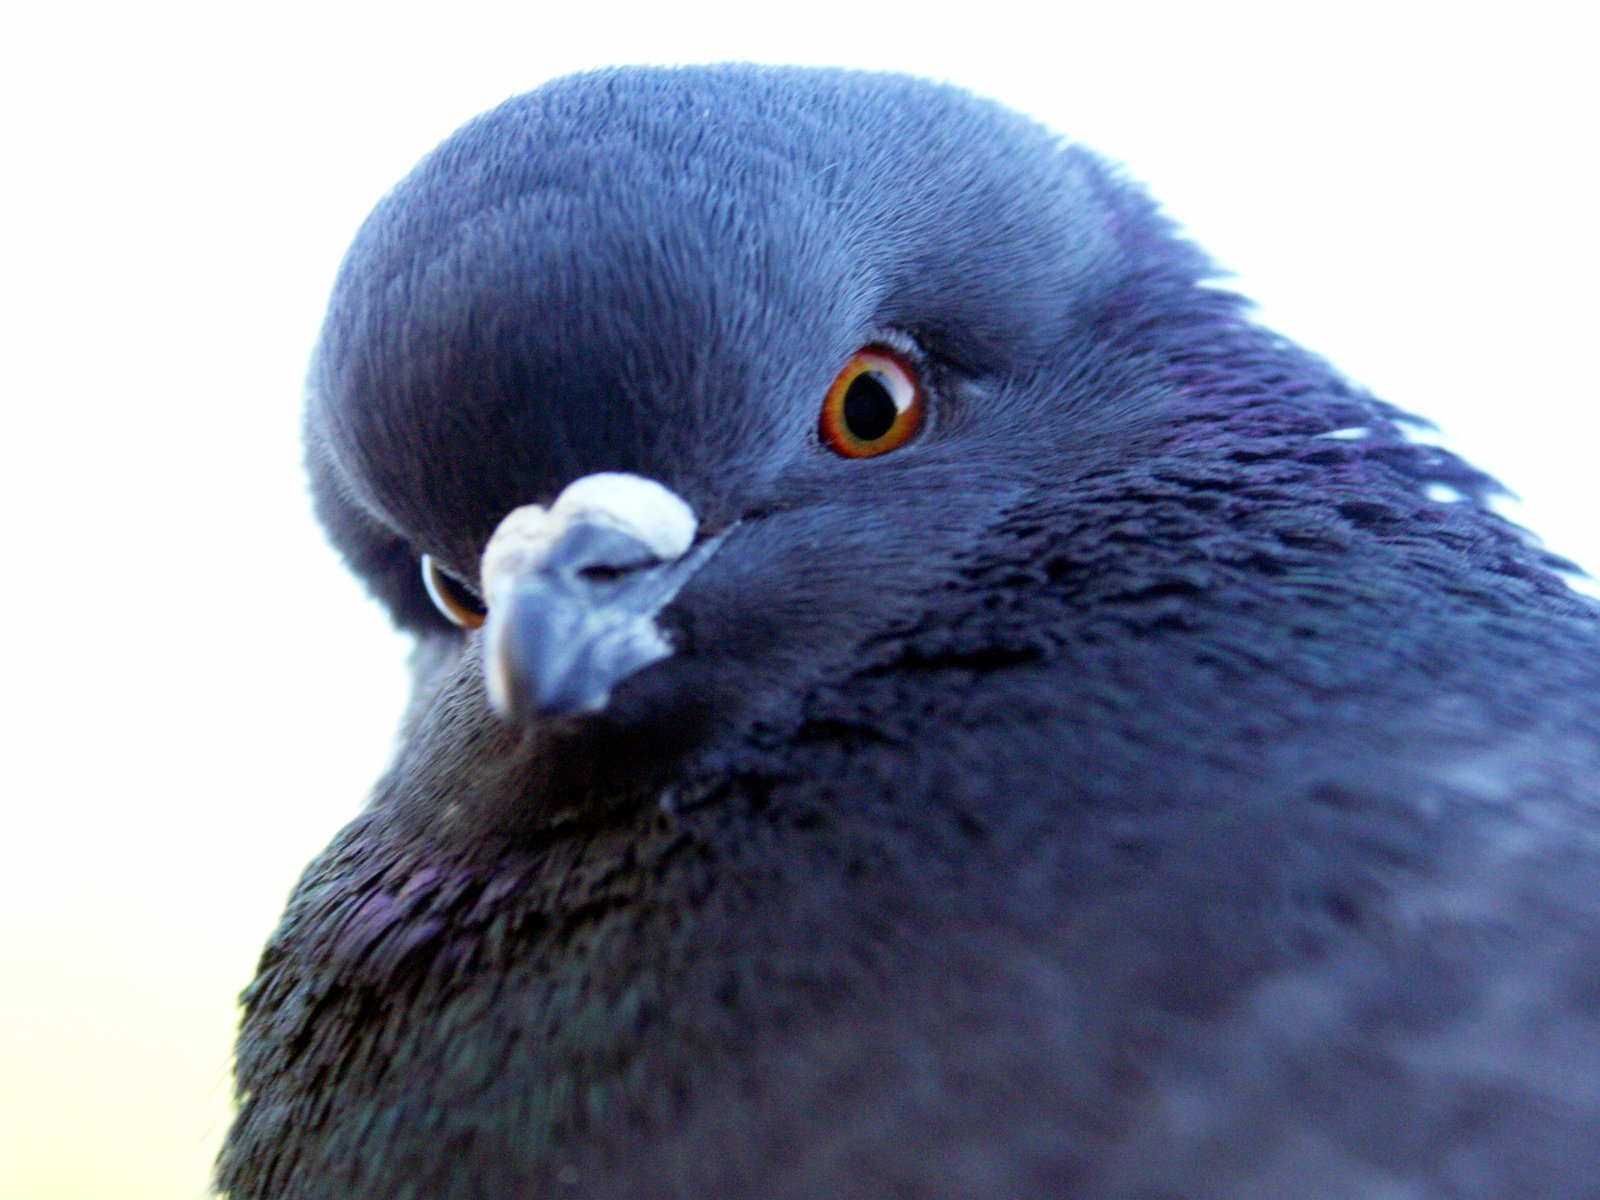 the close up view of a bird with big eyes